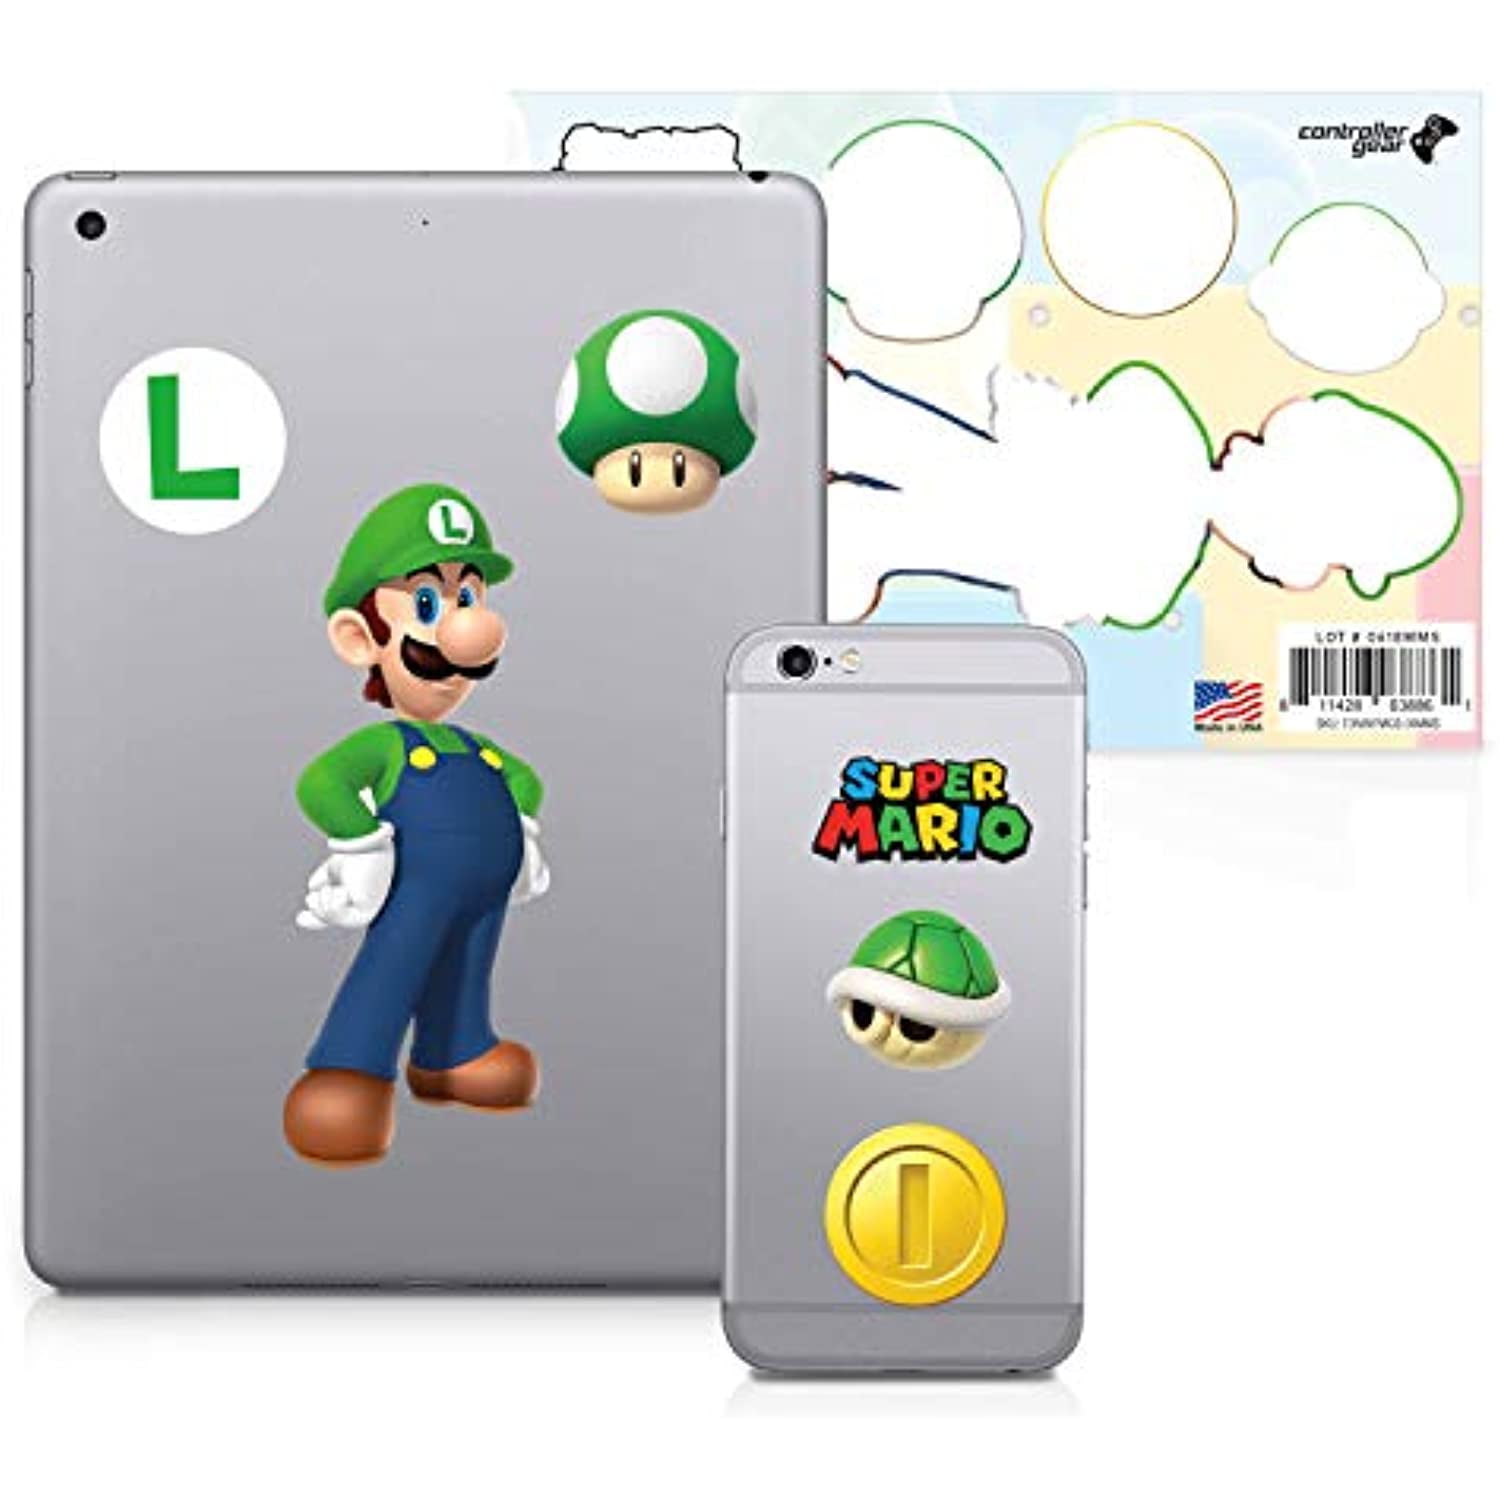 Super Mario, 6 Pack, Luigi Tech Decals, Waterproof Stickers For Phone,  Laptop, Water Bottle, Skateboard, Vinyl Stickers For Boys And Girls